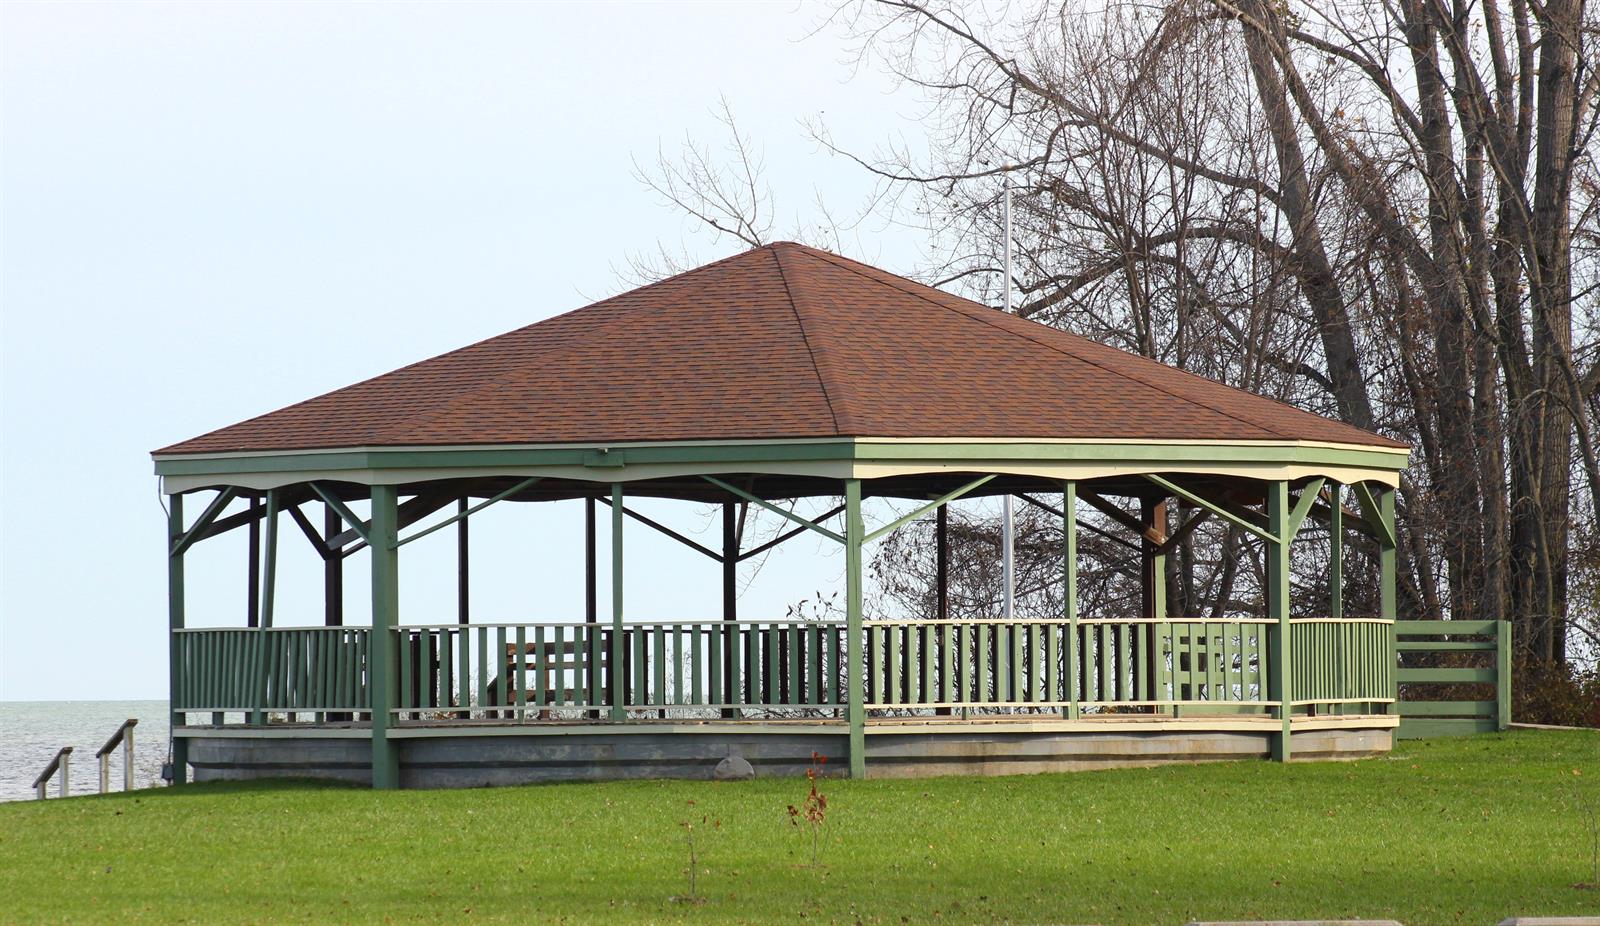 Picture: Piconning Park gazebo